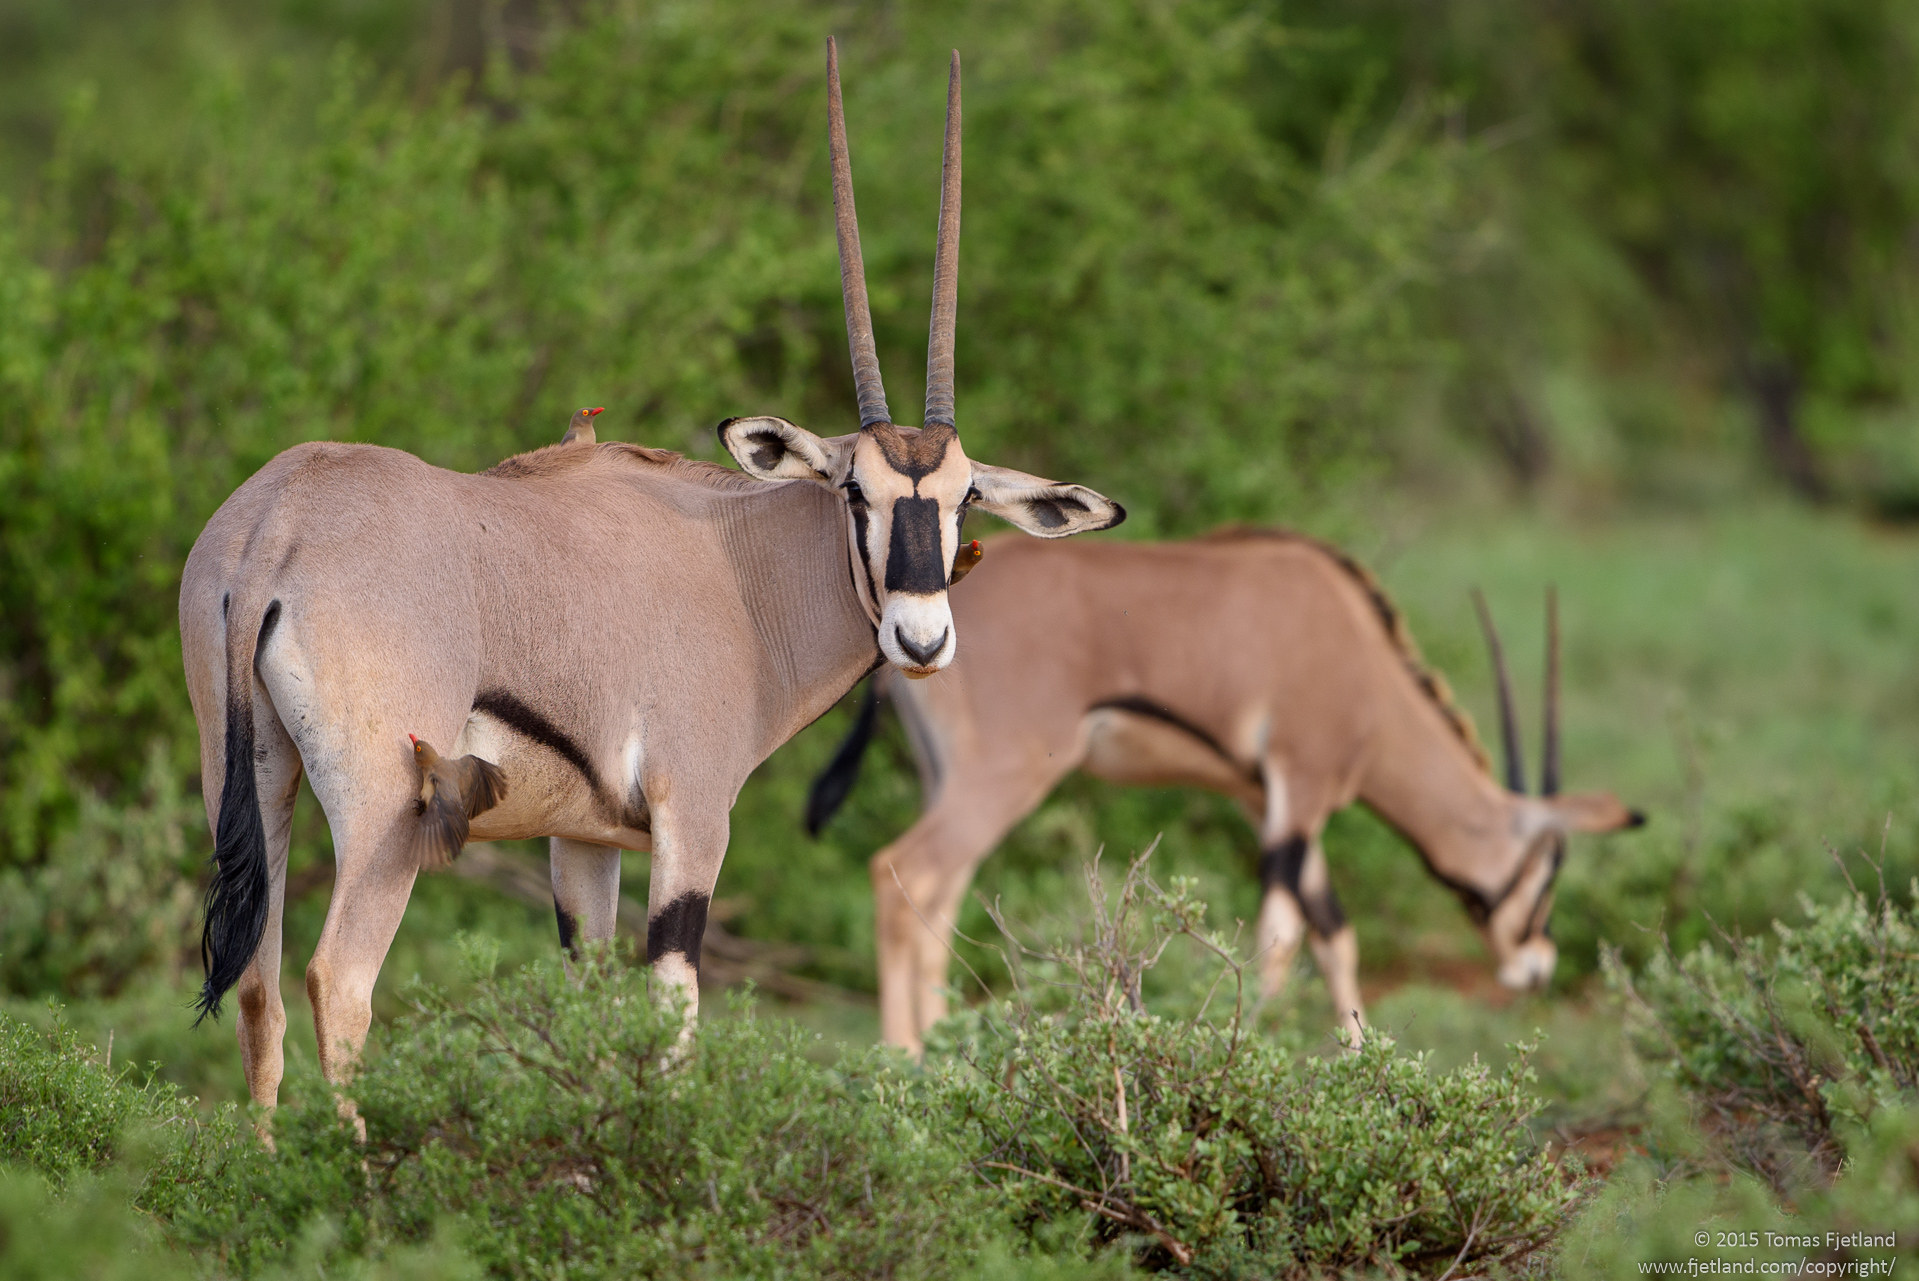 An Oryx getting the full treatment with three red-billed oxpeckers grooming it